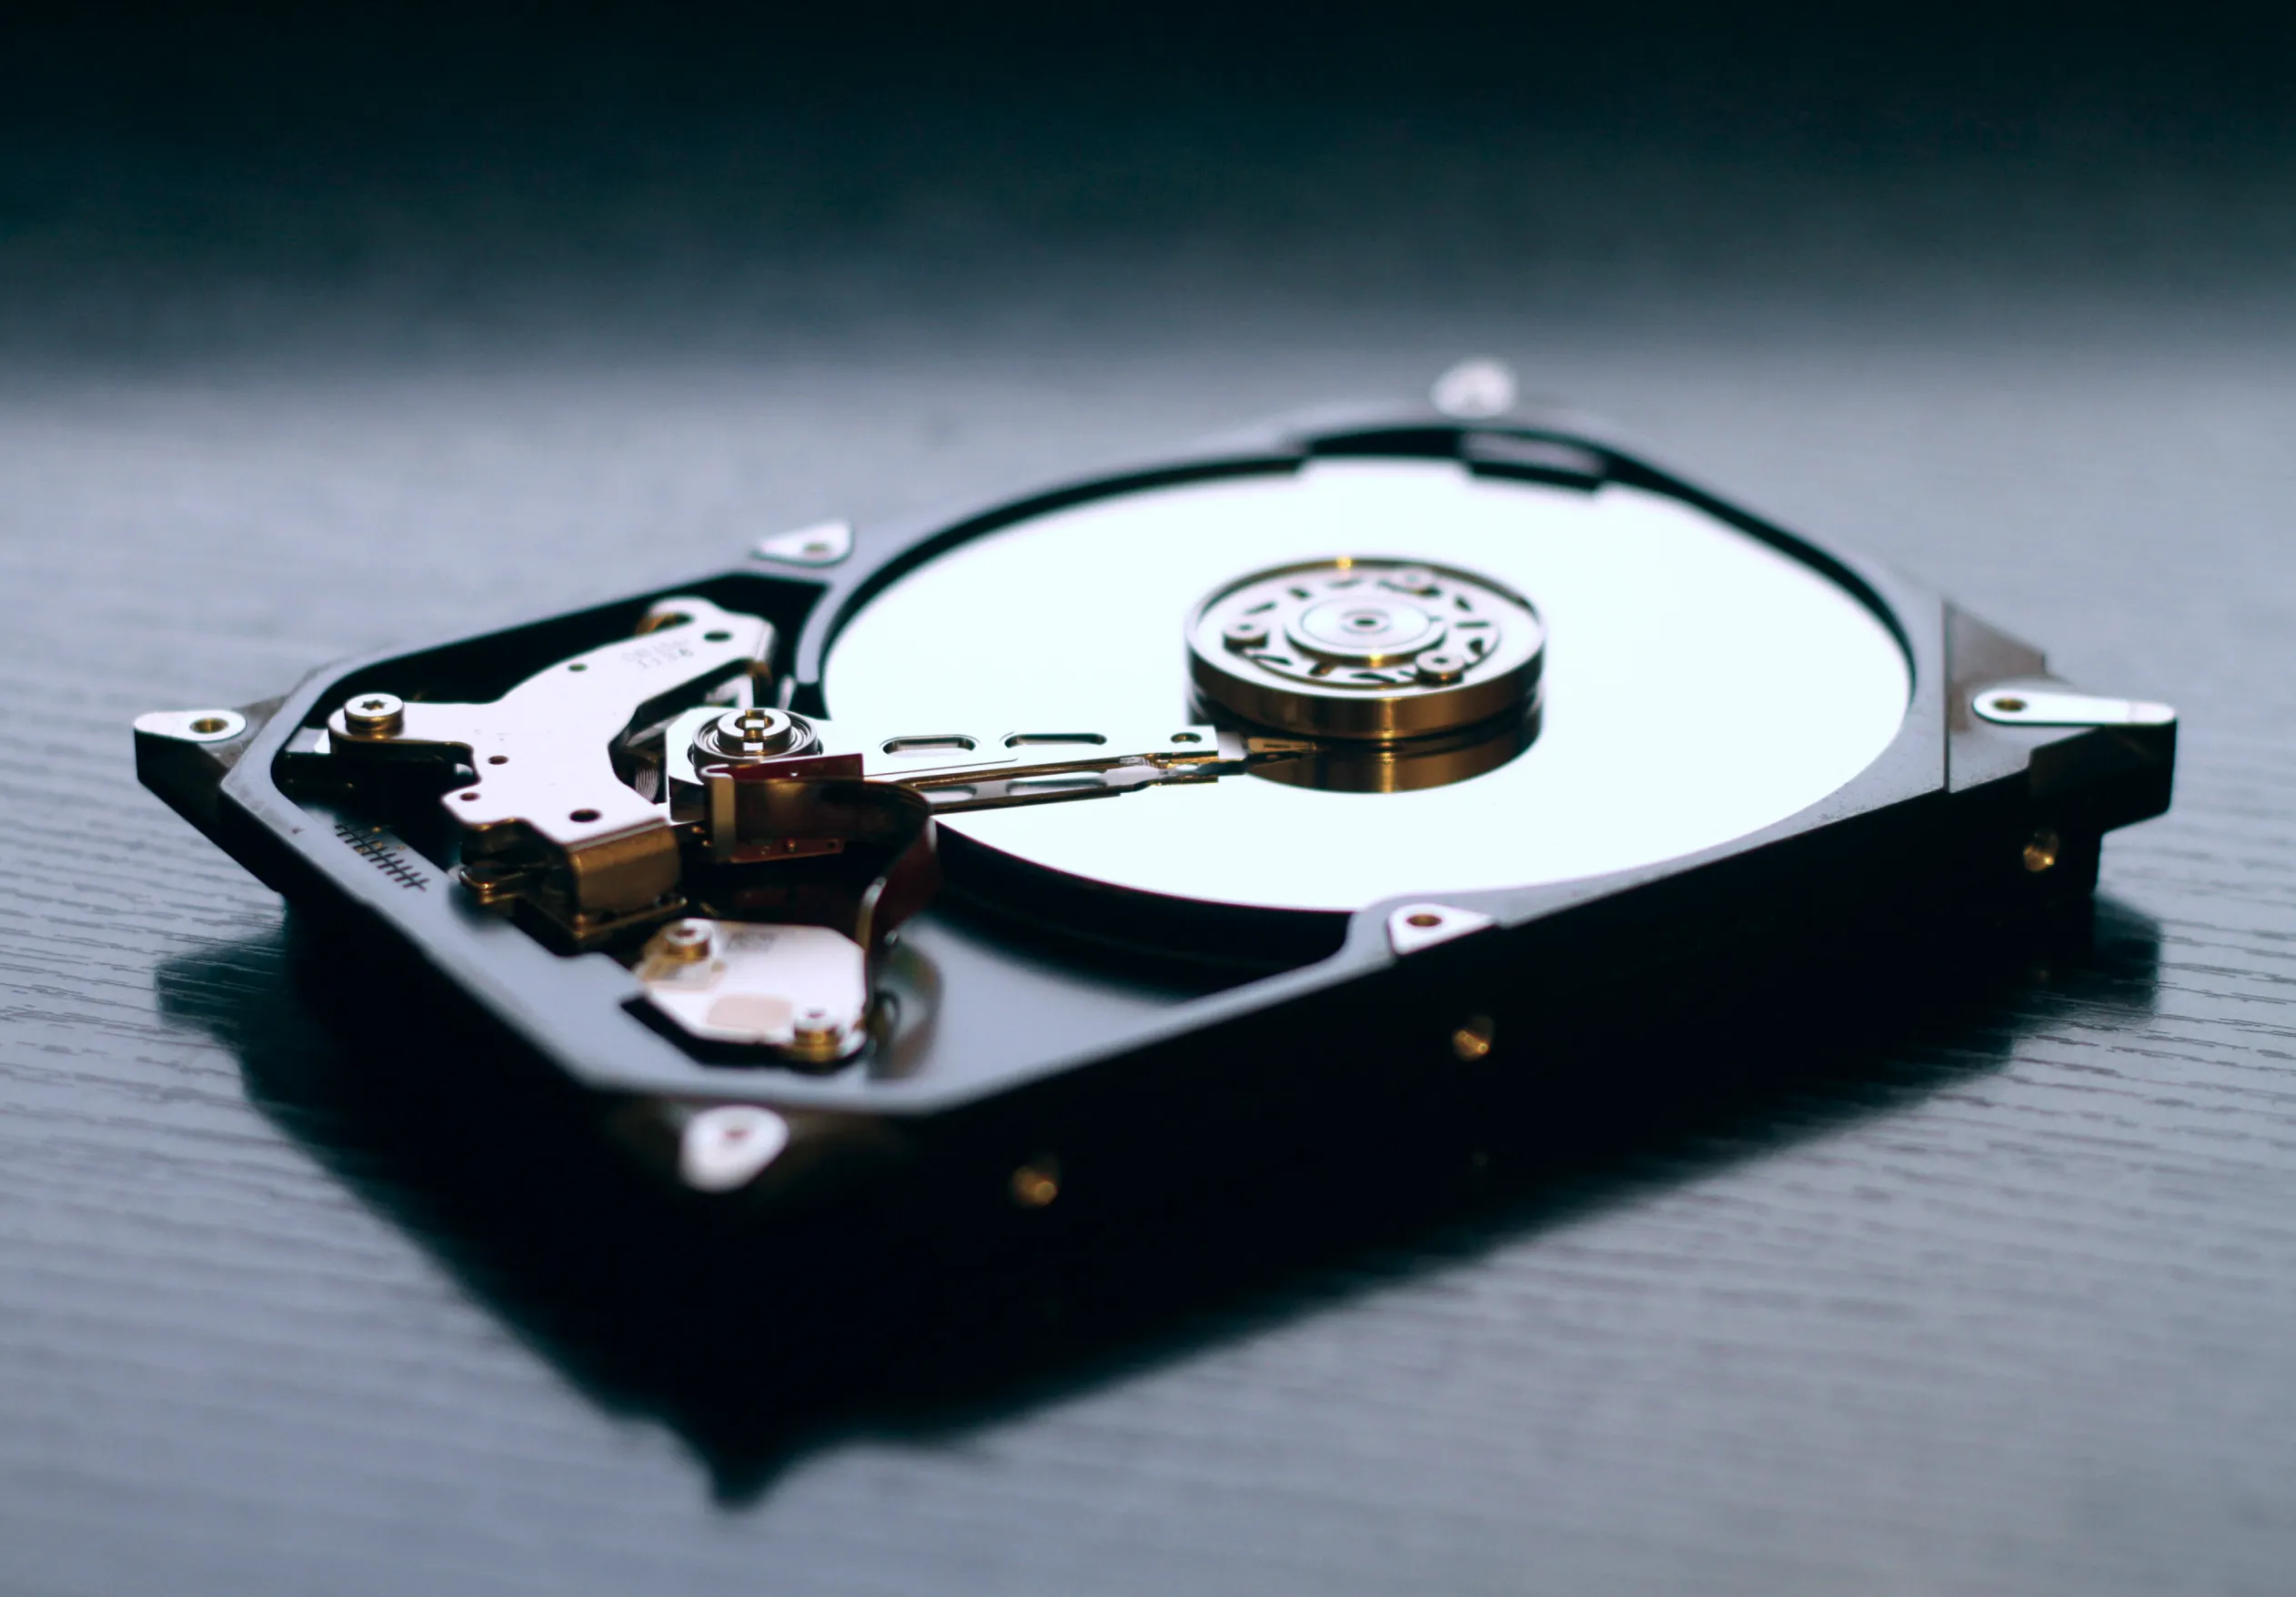 A hard drive, do you want to destroy or secure your data?